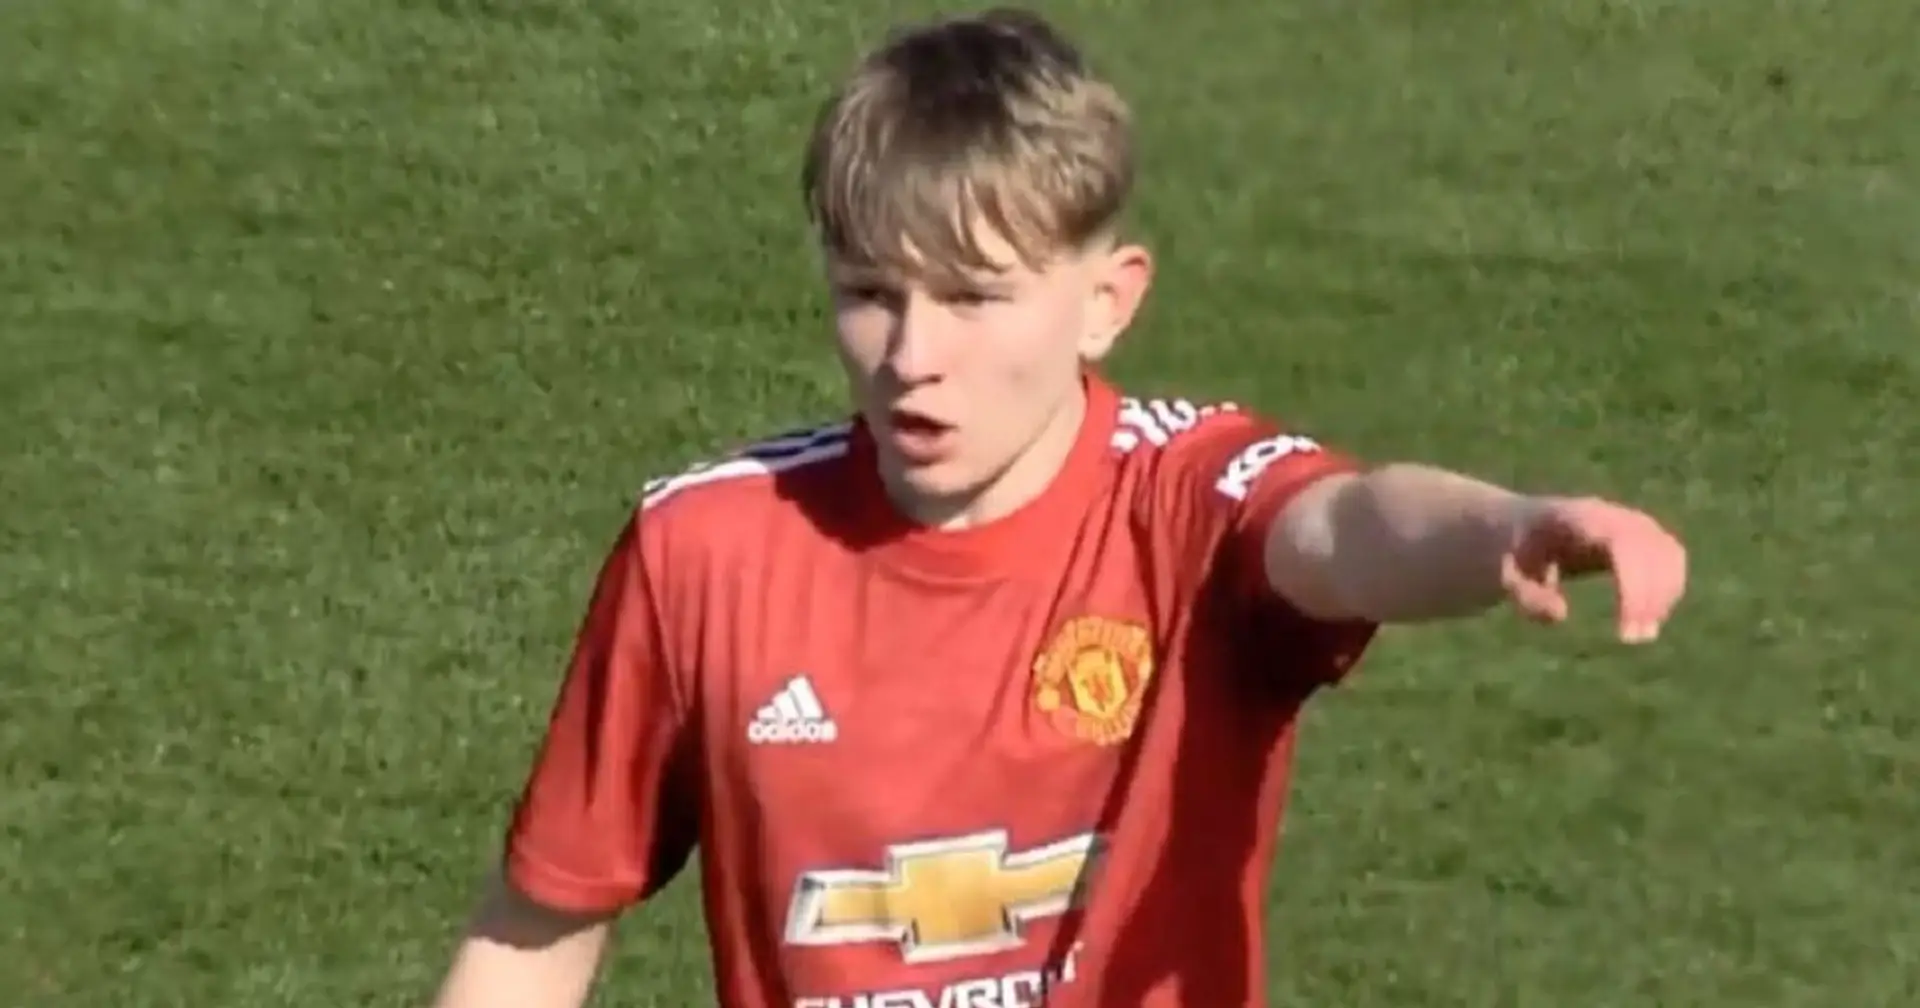 14-year-old Finley McAllister becomes youngest ever to play for United U18s